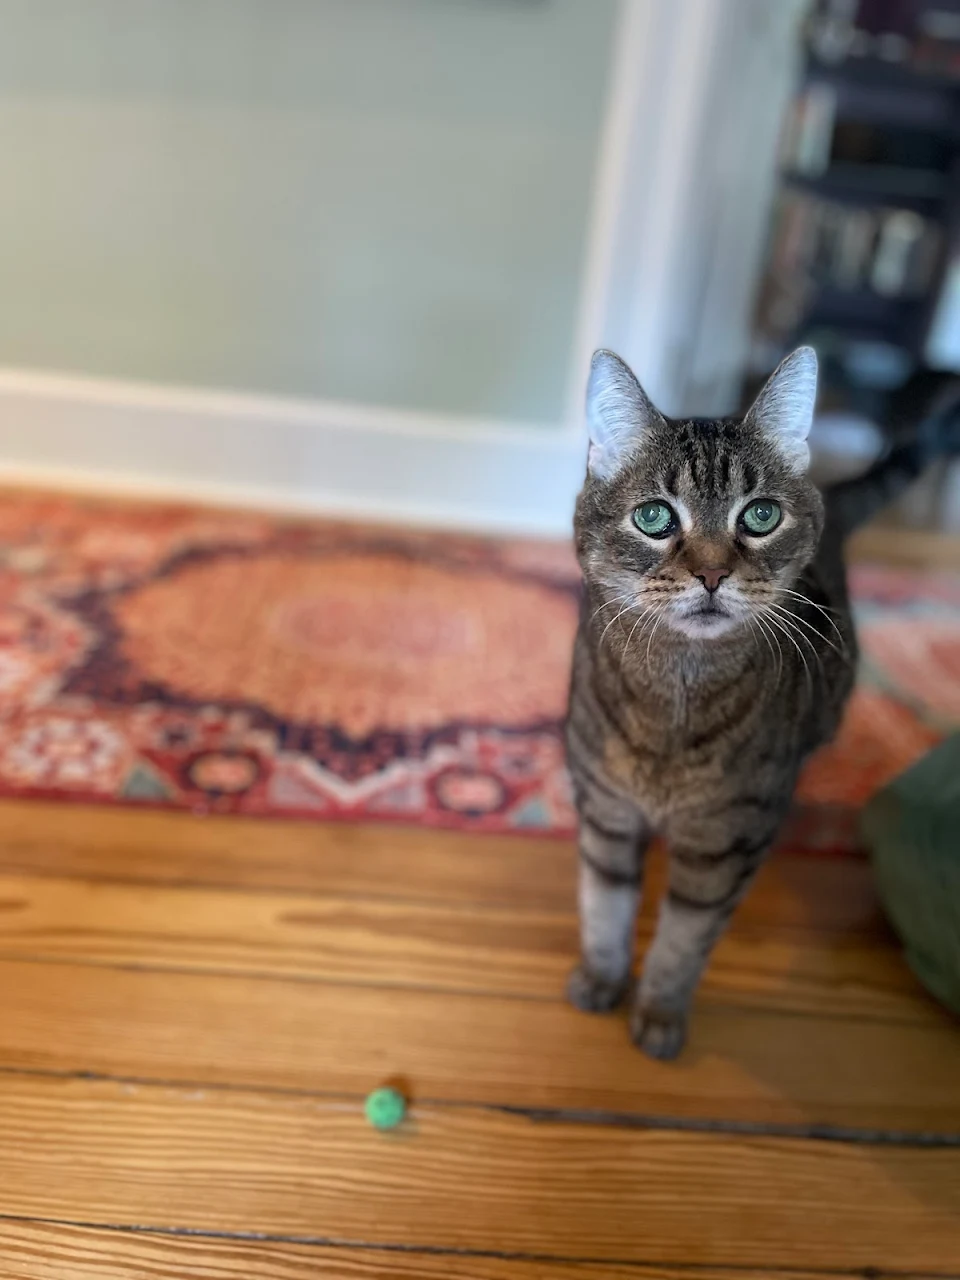 Our old lady tabby with her favorite toy